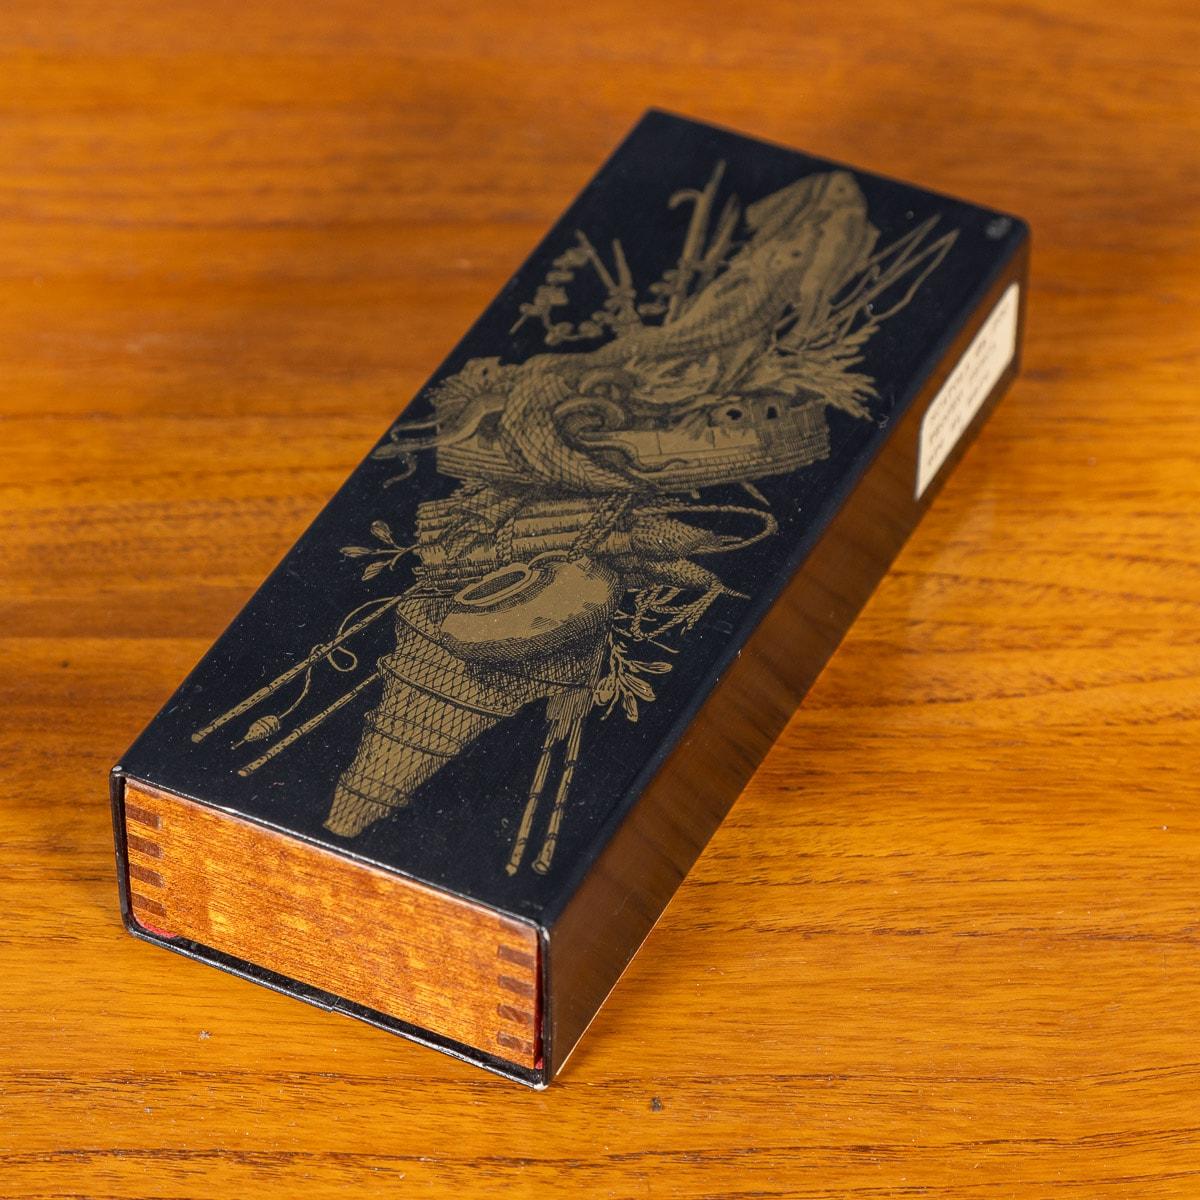 A delightful glove box or trinket box by Piero Fornasetti, circa 1960s / 1970s, with sliding cedar interior, bearing the label 'Trofeo, Pesca' to the side of the box. The exterior is lacquered with depictions of traditional fishing trophies. These